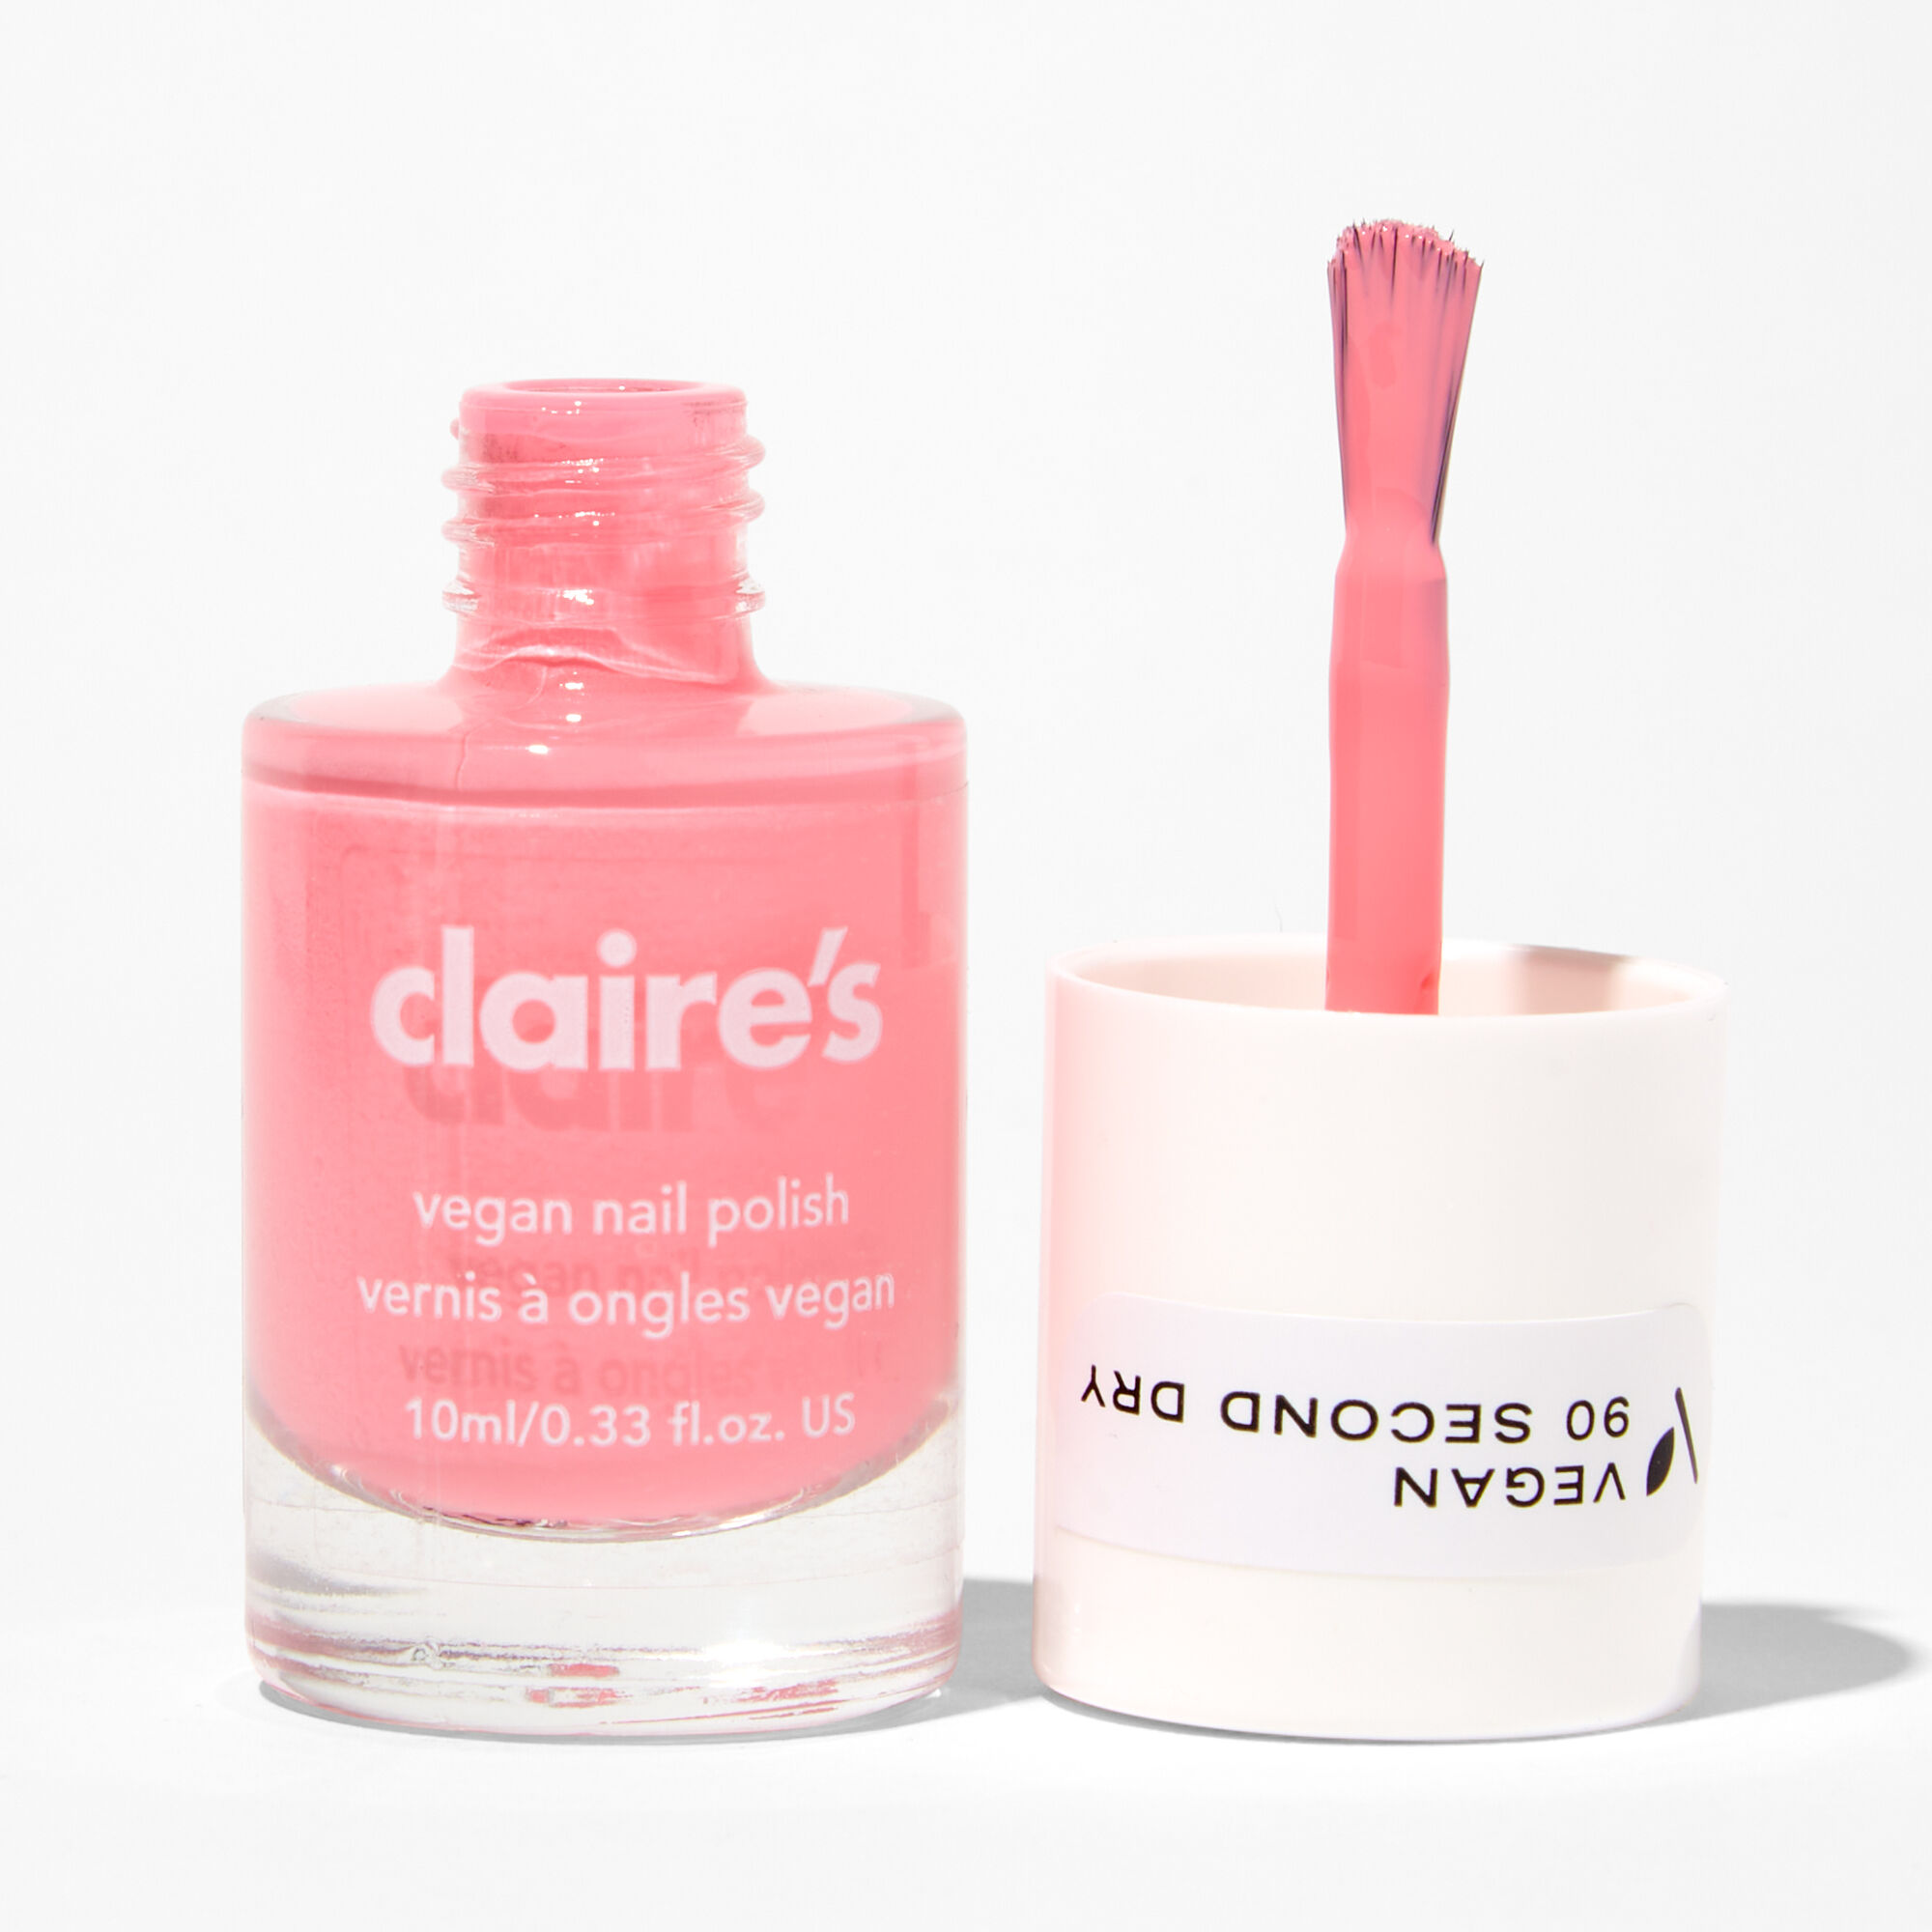 View Claires Vegan 90 Second Dry Nail Polish Powerful Pink information